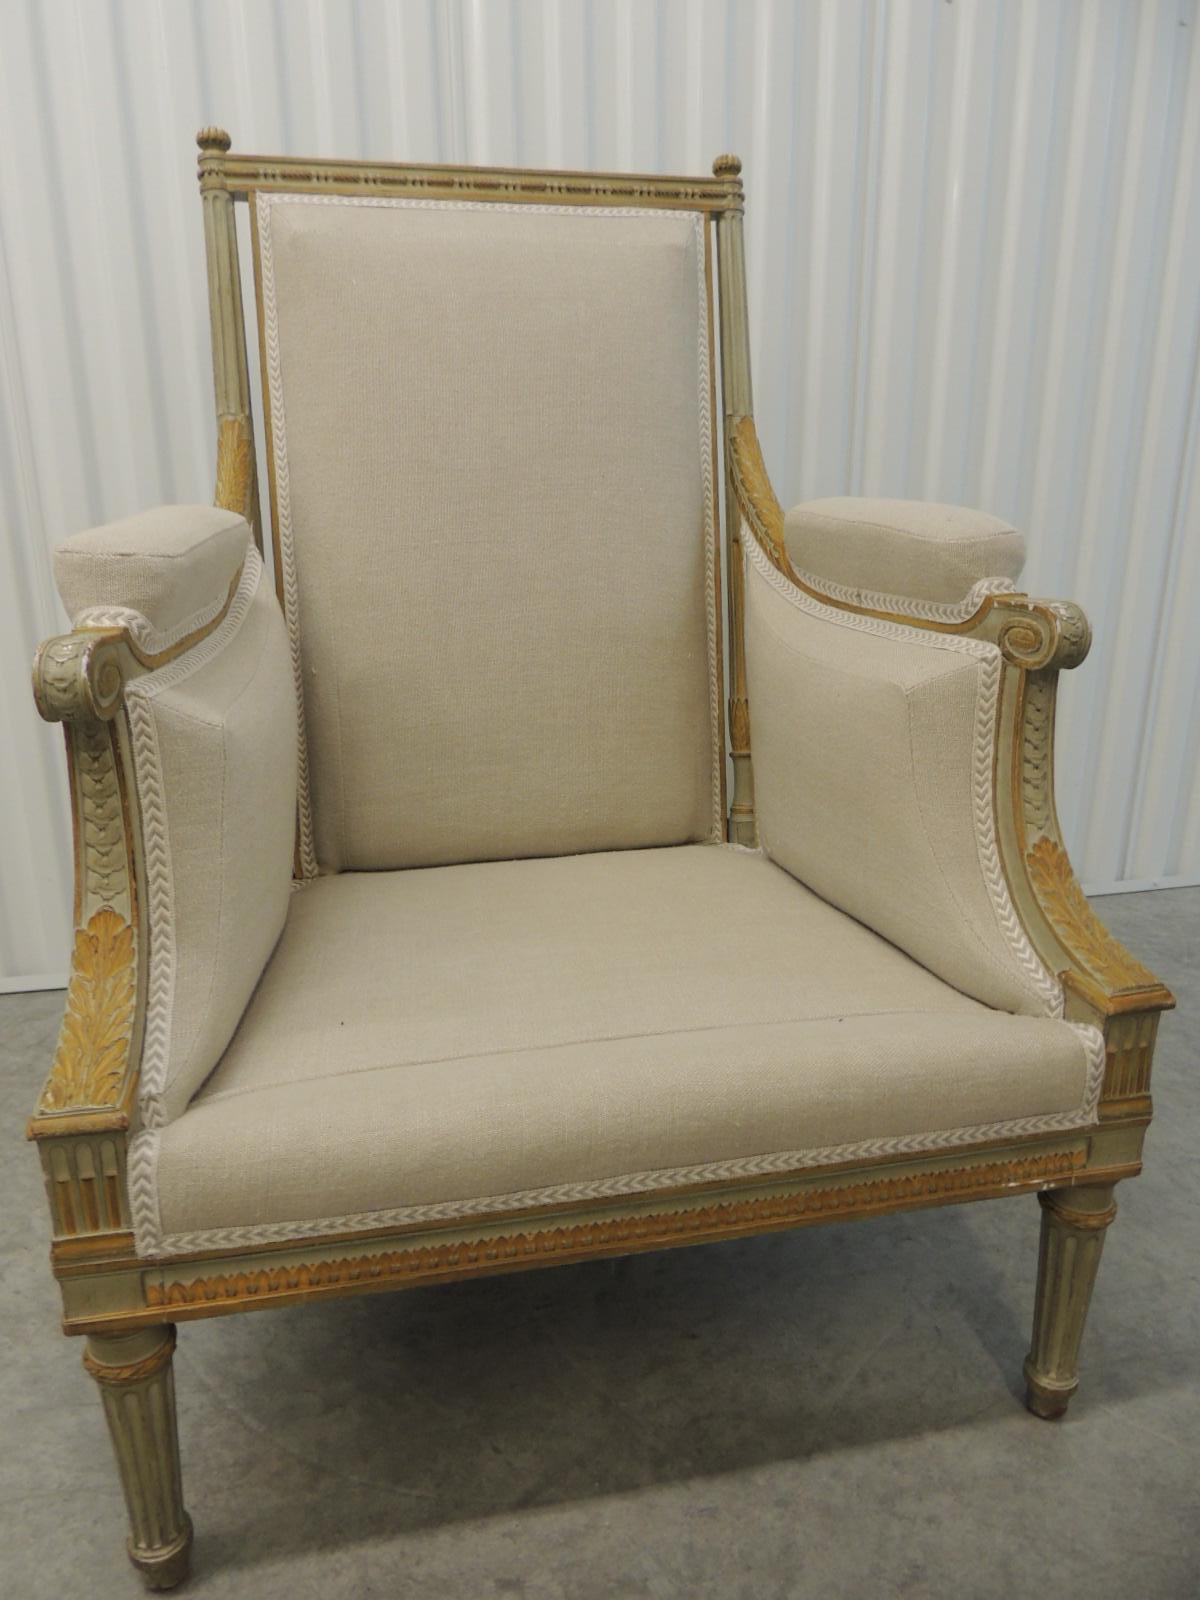 19th Century French Neoclassical Carved Arm Chair Upholstered in Natural Grain Sack Linen 